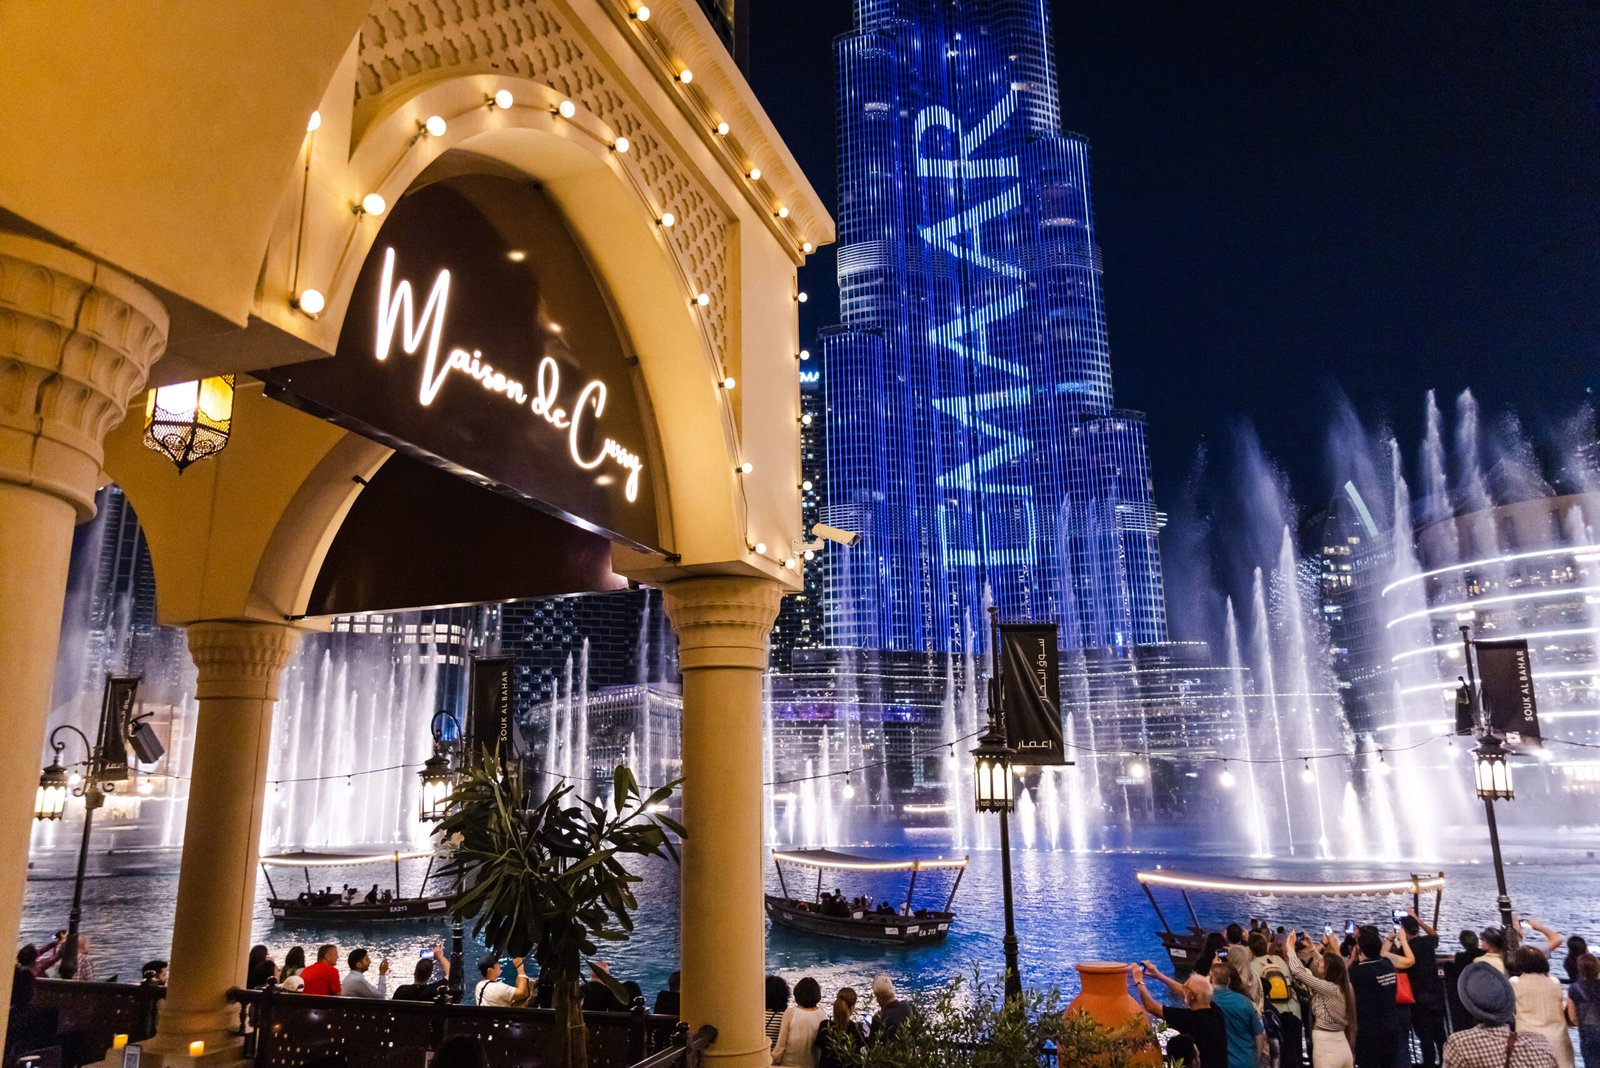 restaurant with the best view | Maison de Curry | Dine-in with the best views in Dubai